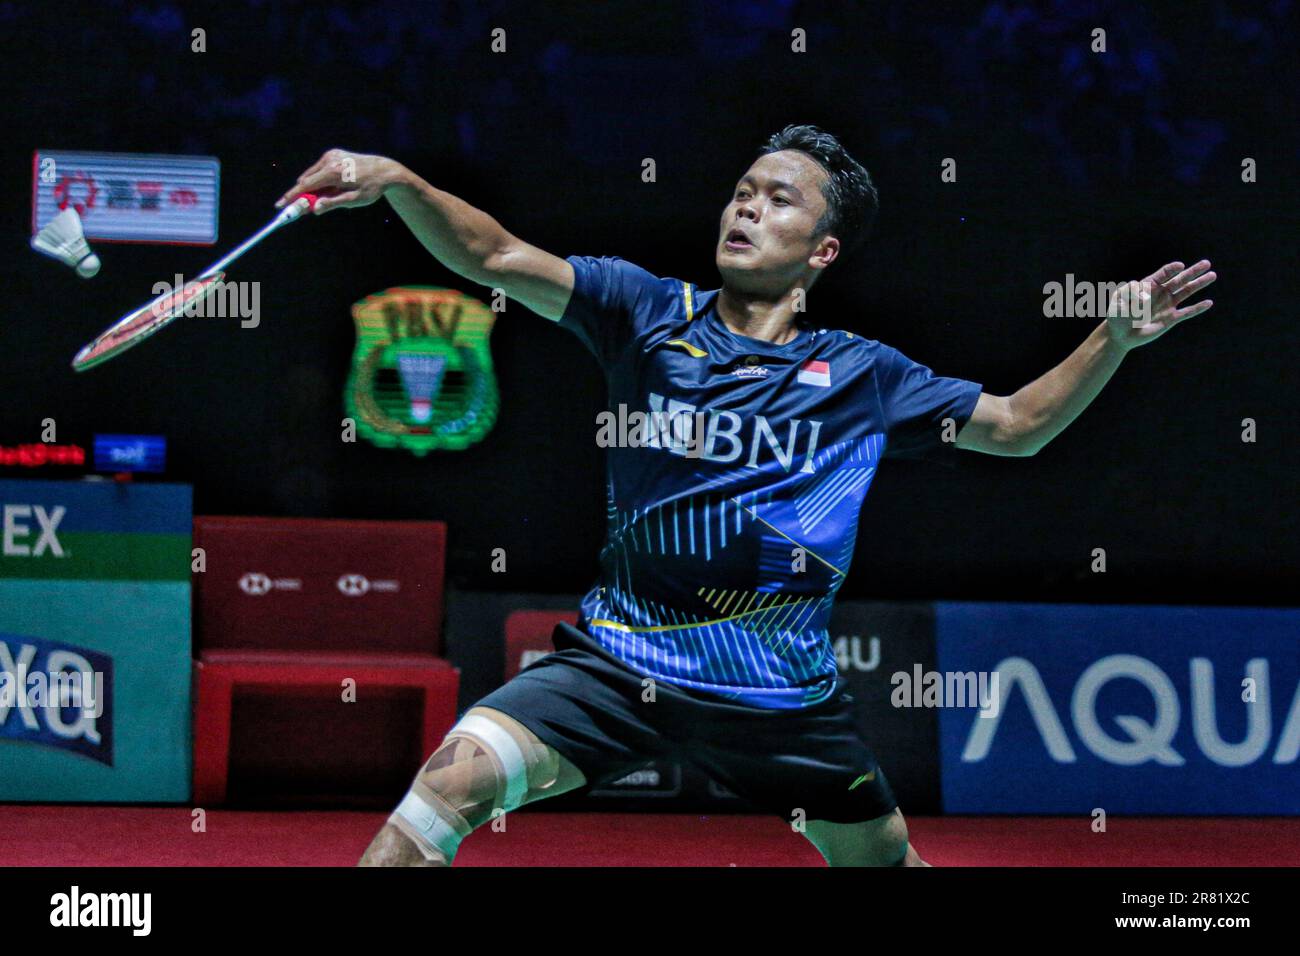 Badminton player from Indonesia, Anthony Sinusuka plays against Viktor  Axelsen during the final of the 2023 Indonesia Open Championship at Istora  Senayan. The men's singles final for the 2023 Indonesia Open badminton